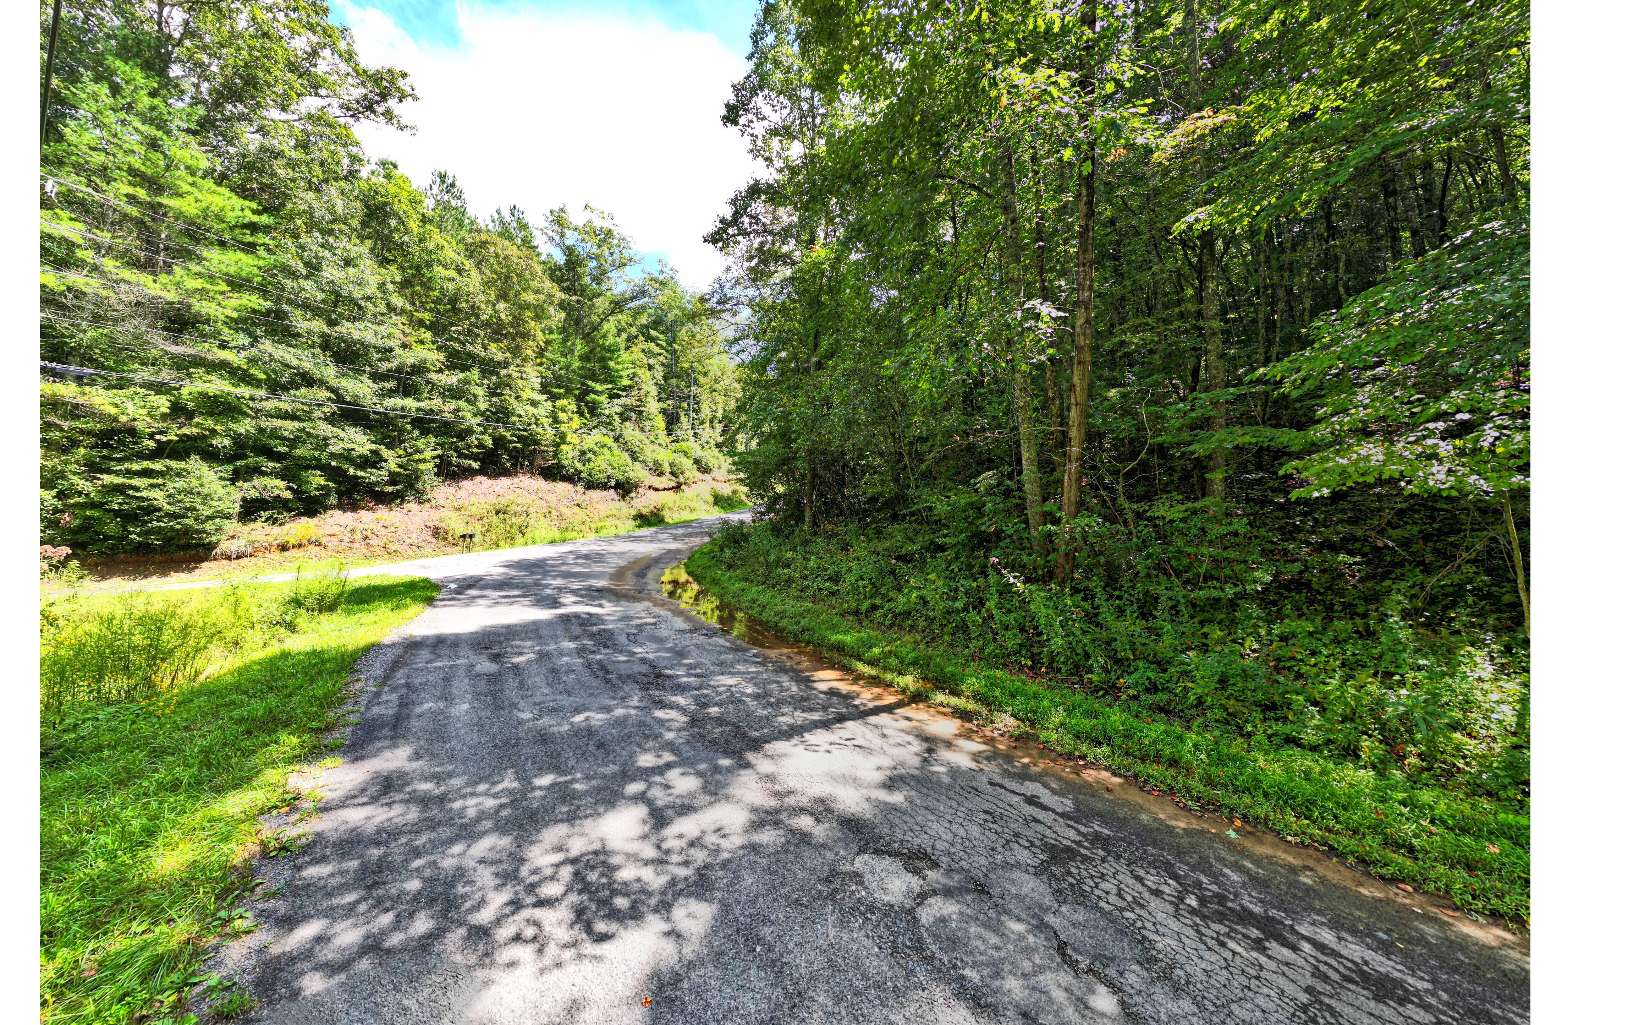 Want to have large acreage but not be totally isolated from getting to town for groceries and day trips? Want to have paved roads leading all the way to your property? This 12 acre parcel in BEAUTIFUL ELLIJAY, GA is only 10 min to town and still feels like it is AWAY FROM IT ALL! Very minimal restrictions in place to protect your investment. NO HOA or FEES. Opportunities abound on this acreage and the location is so CONVENIENT and yet so PRIVATE! Perfect to build your hideaway retreat. Property has already been perked for septic. The WILDLIFE LOVES IT HERE and YOU WILL TOO! It's time to leave the busy of the world behind and escape to your mountain retreat on Pleasant Gap Rd. Convenient to Carters Lake for your lake adventures and numerous hiking trails nearby to explore. Your Ellijay mountain retreat is waiting for you to build it on this beautiful wooded 12 acres on Pleasant Gap Rd. Come see and explore it today!